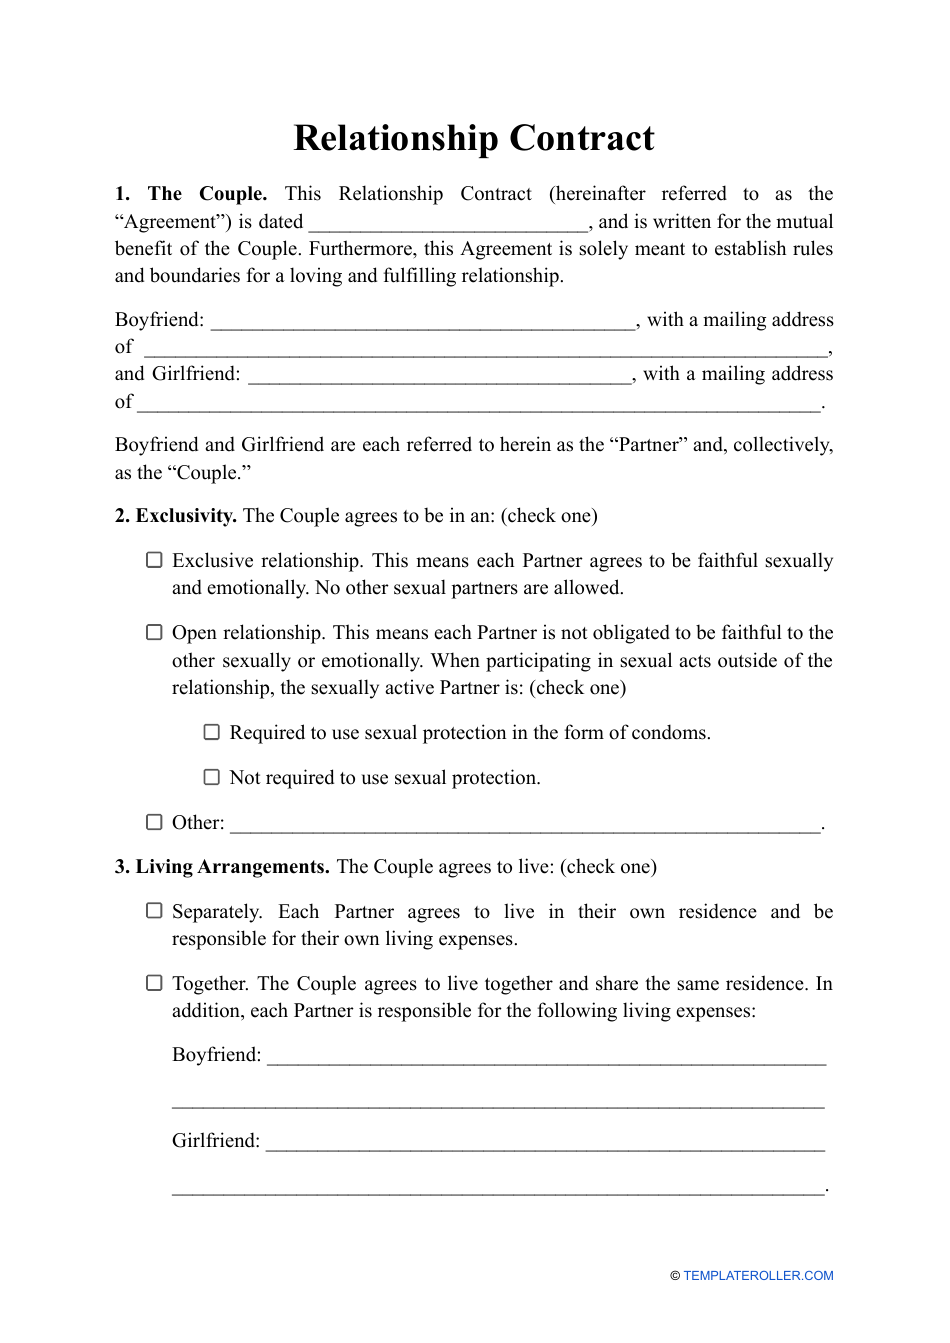 relationship-contract-template-fill-out-sign-online-and-download-pdf